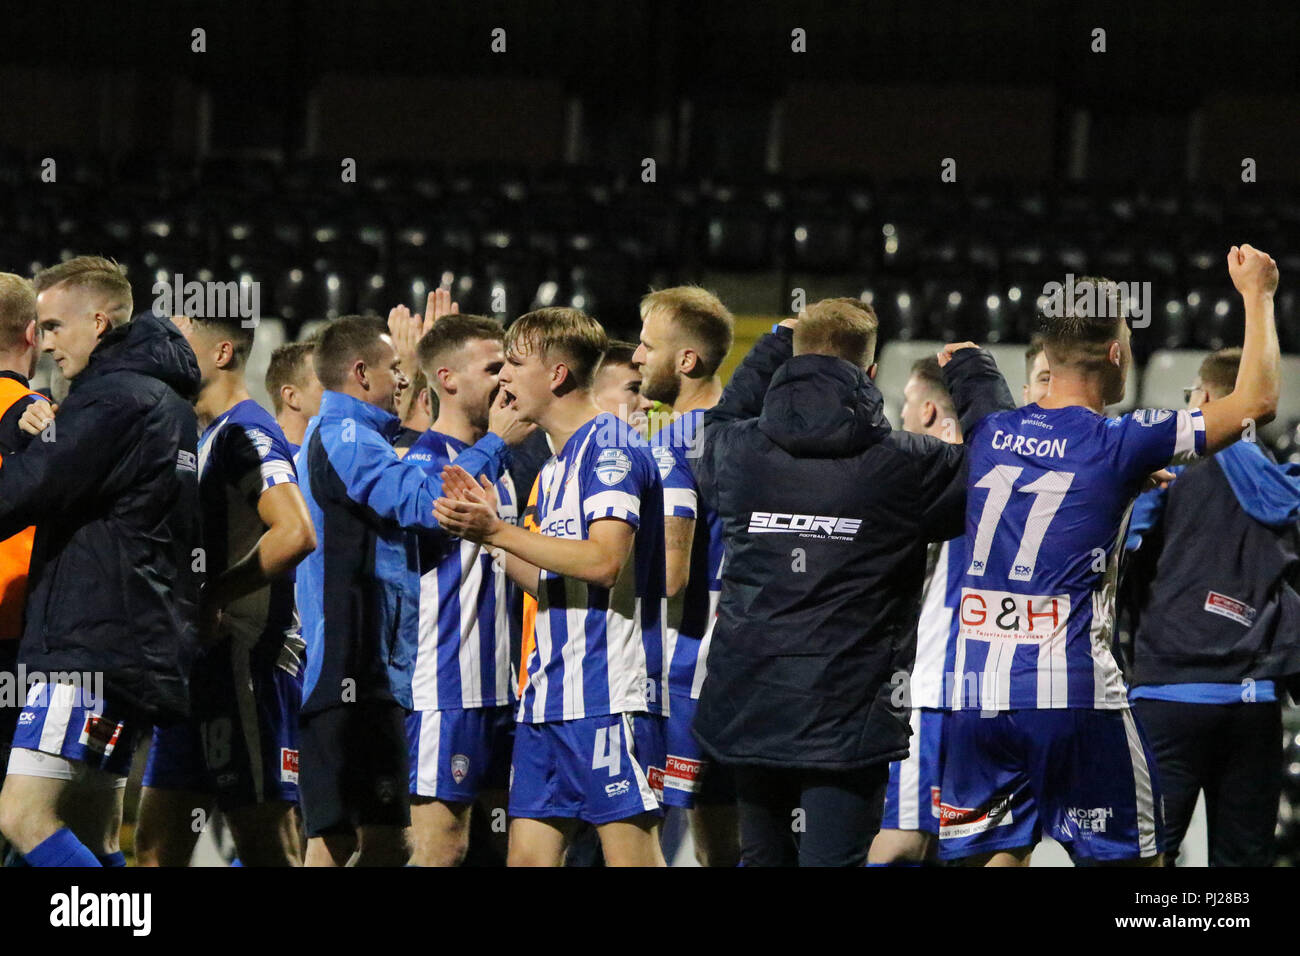 Seaview, Belfast, Northern Ireland.03 September 2018. Danske Bank Premiership - Crusaders v Coleraine. Action from tonight's game at Seaview. Coleraine players celebrate their 3-0 win over champions Crusaders. Credit: David Hunter/Alamy Live News. Stock Photo